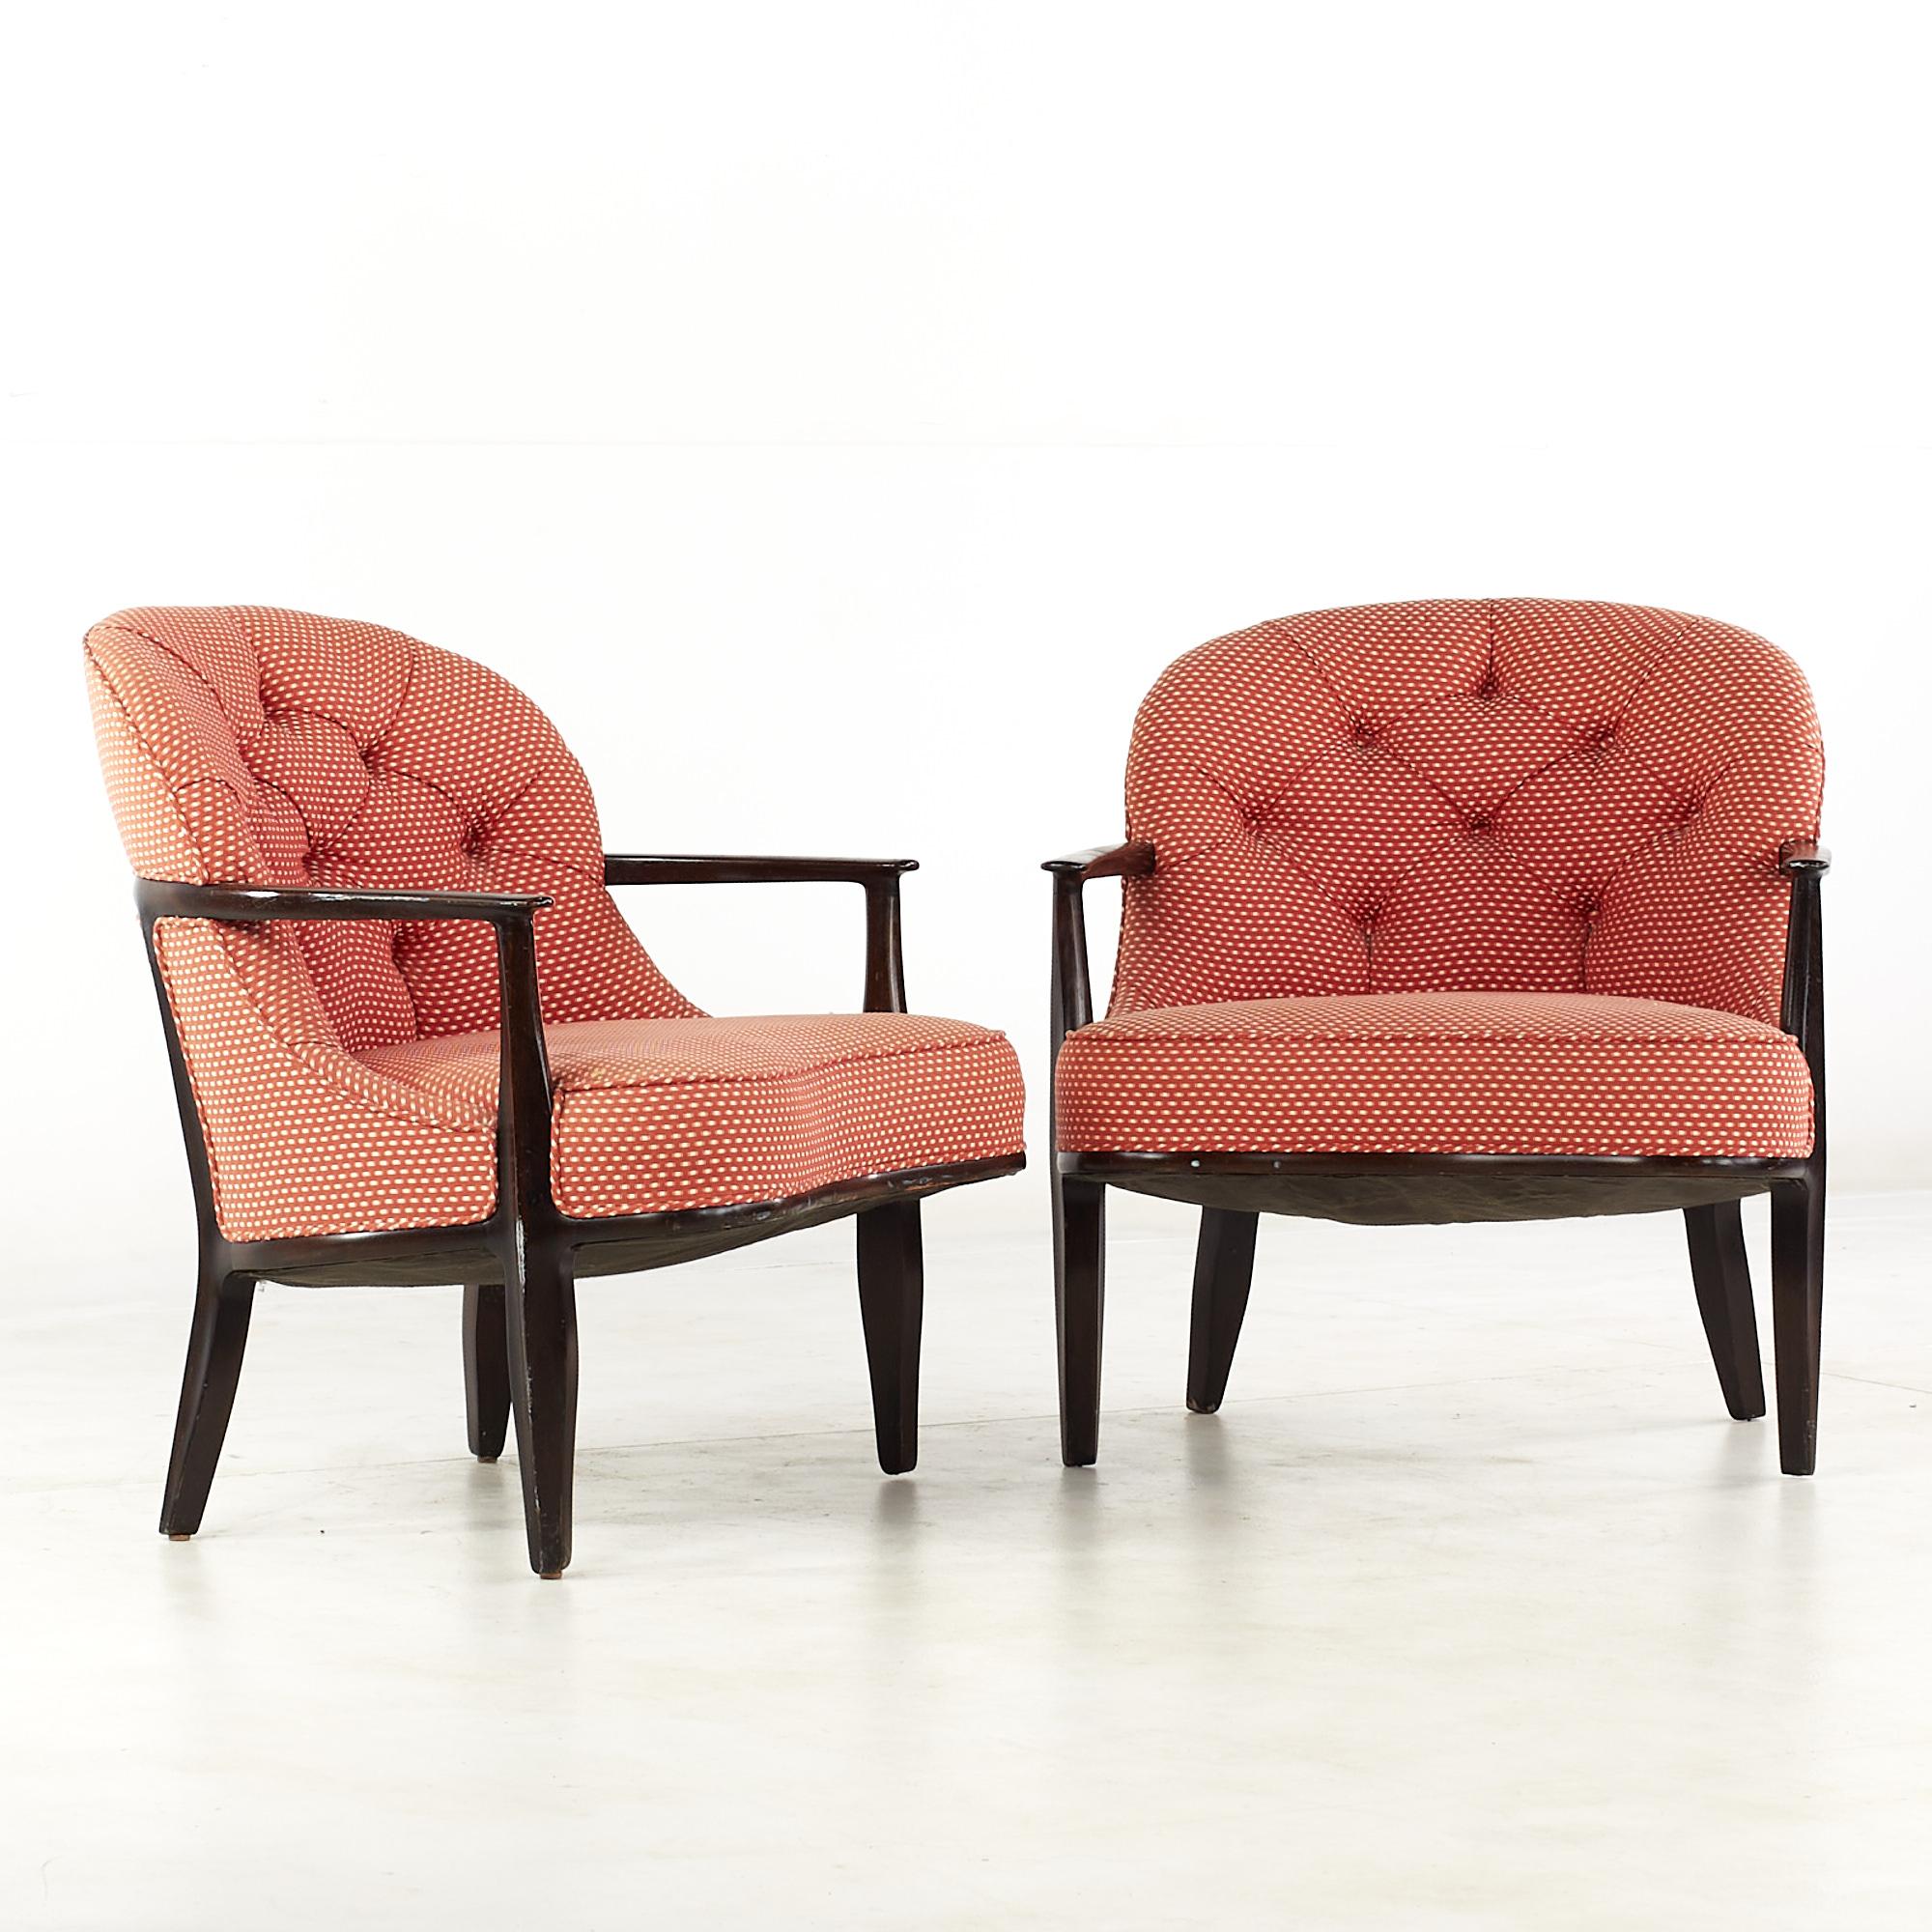 Edward Wormley for Dunbar Janus mid-century lounge chairs - pair.

This chair measures: 27 wide x 27 deep x 33 high, with a seat height of 15.5 and arm height/chair clearance 21 inches.

All pieces of furniture can be had in what we call